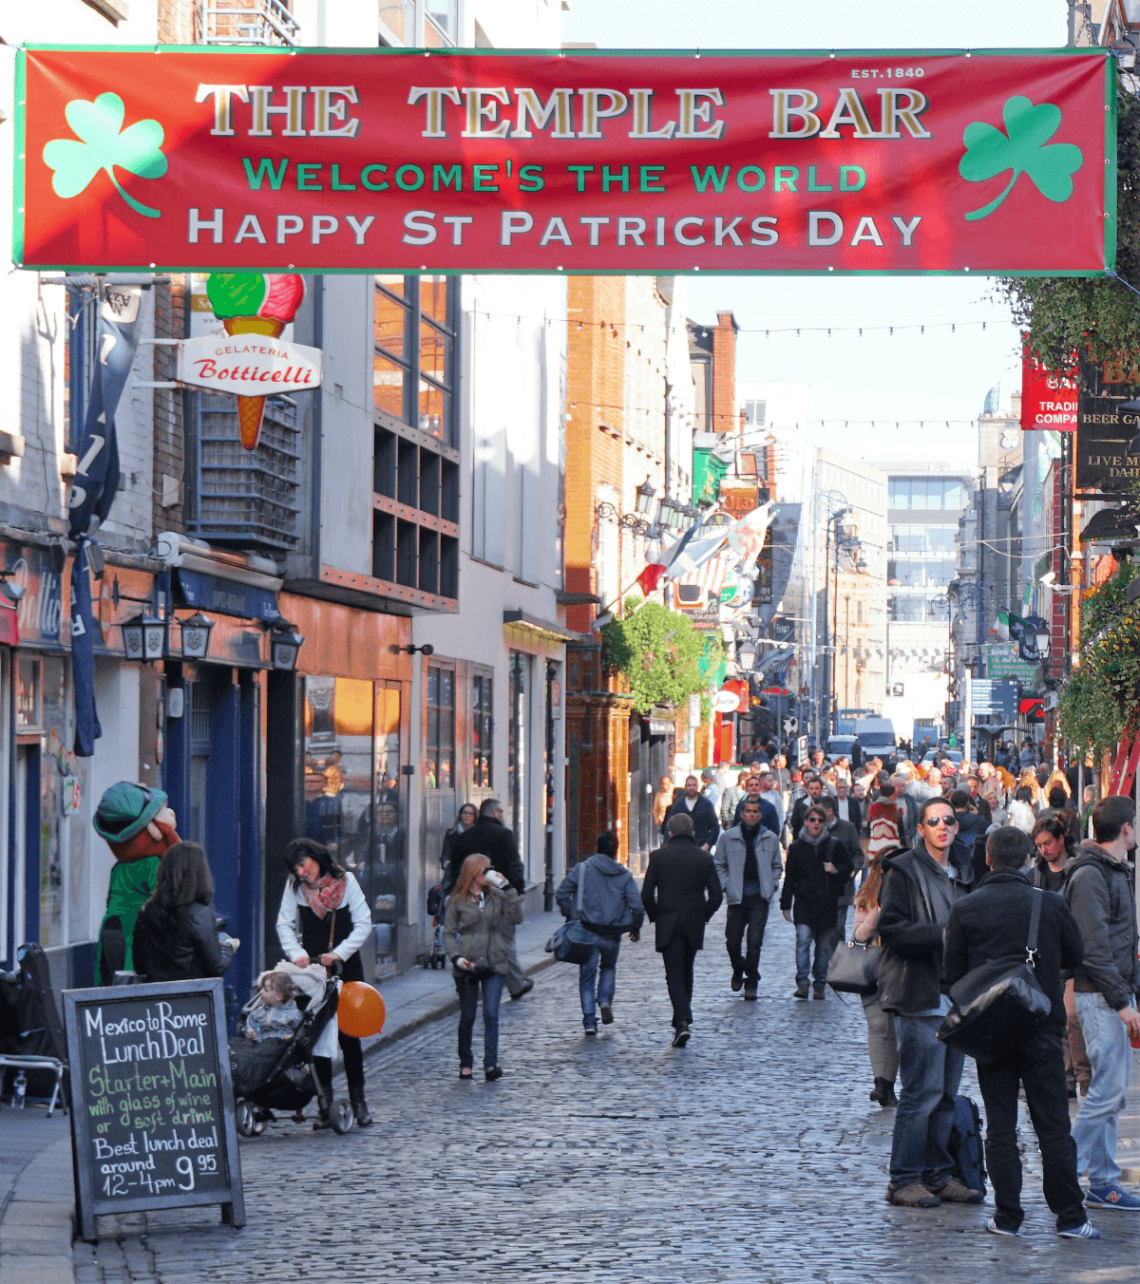 St. Patrick's Day on the streets of Dublin at The Temple Bar